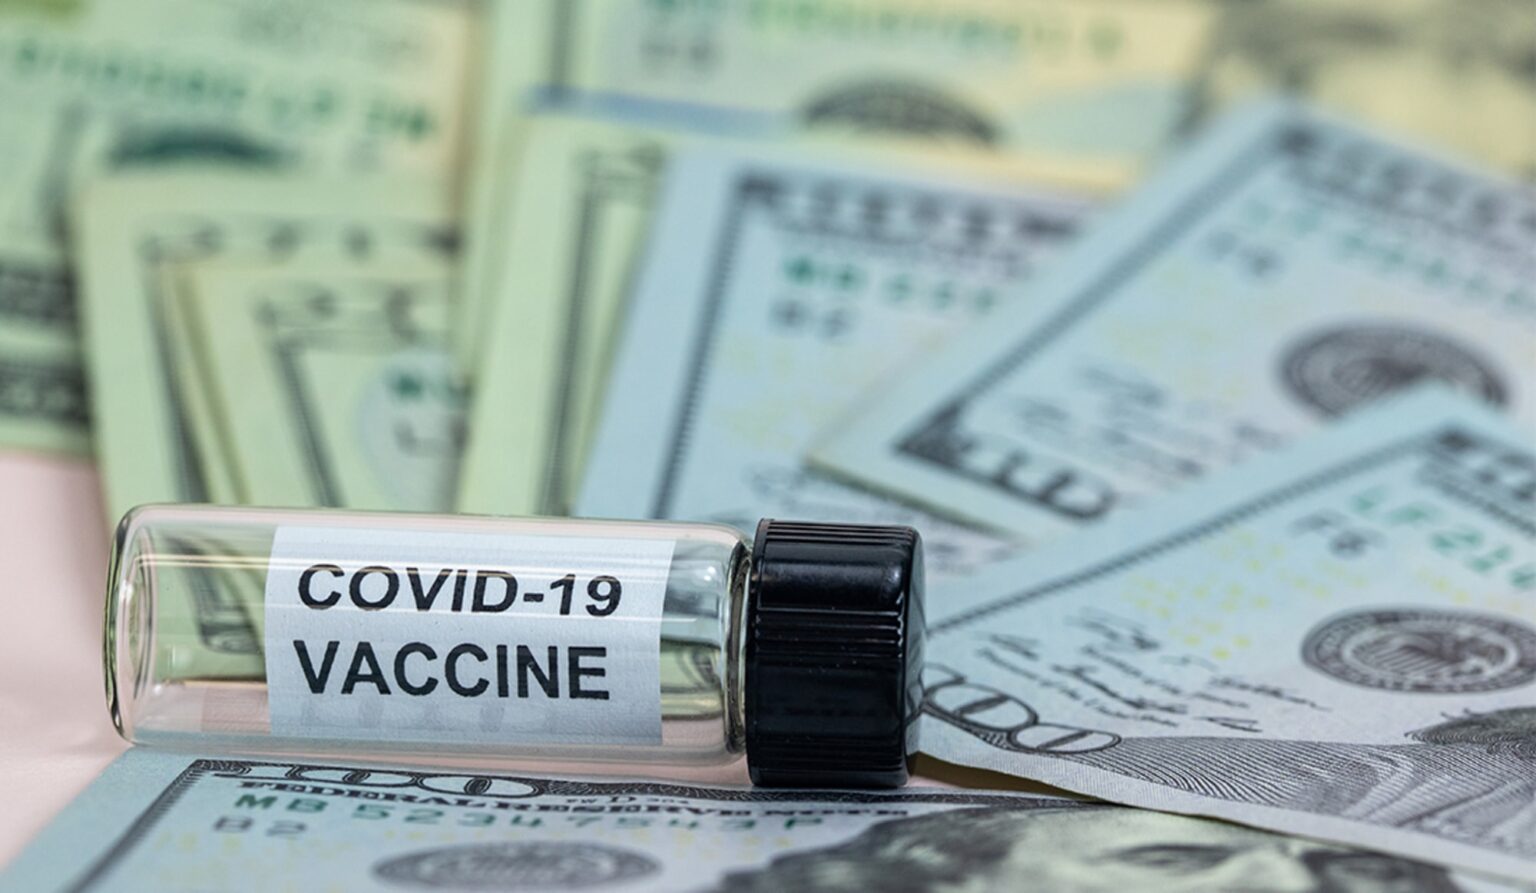 Still waiting for your COVID-19 vaccine? Looks like some Hollywood elites are tired of waiting. Check out if money will help them through the pandemic.